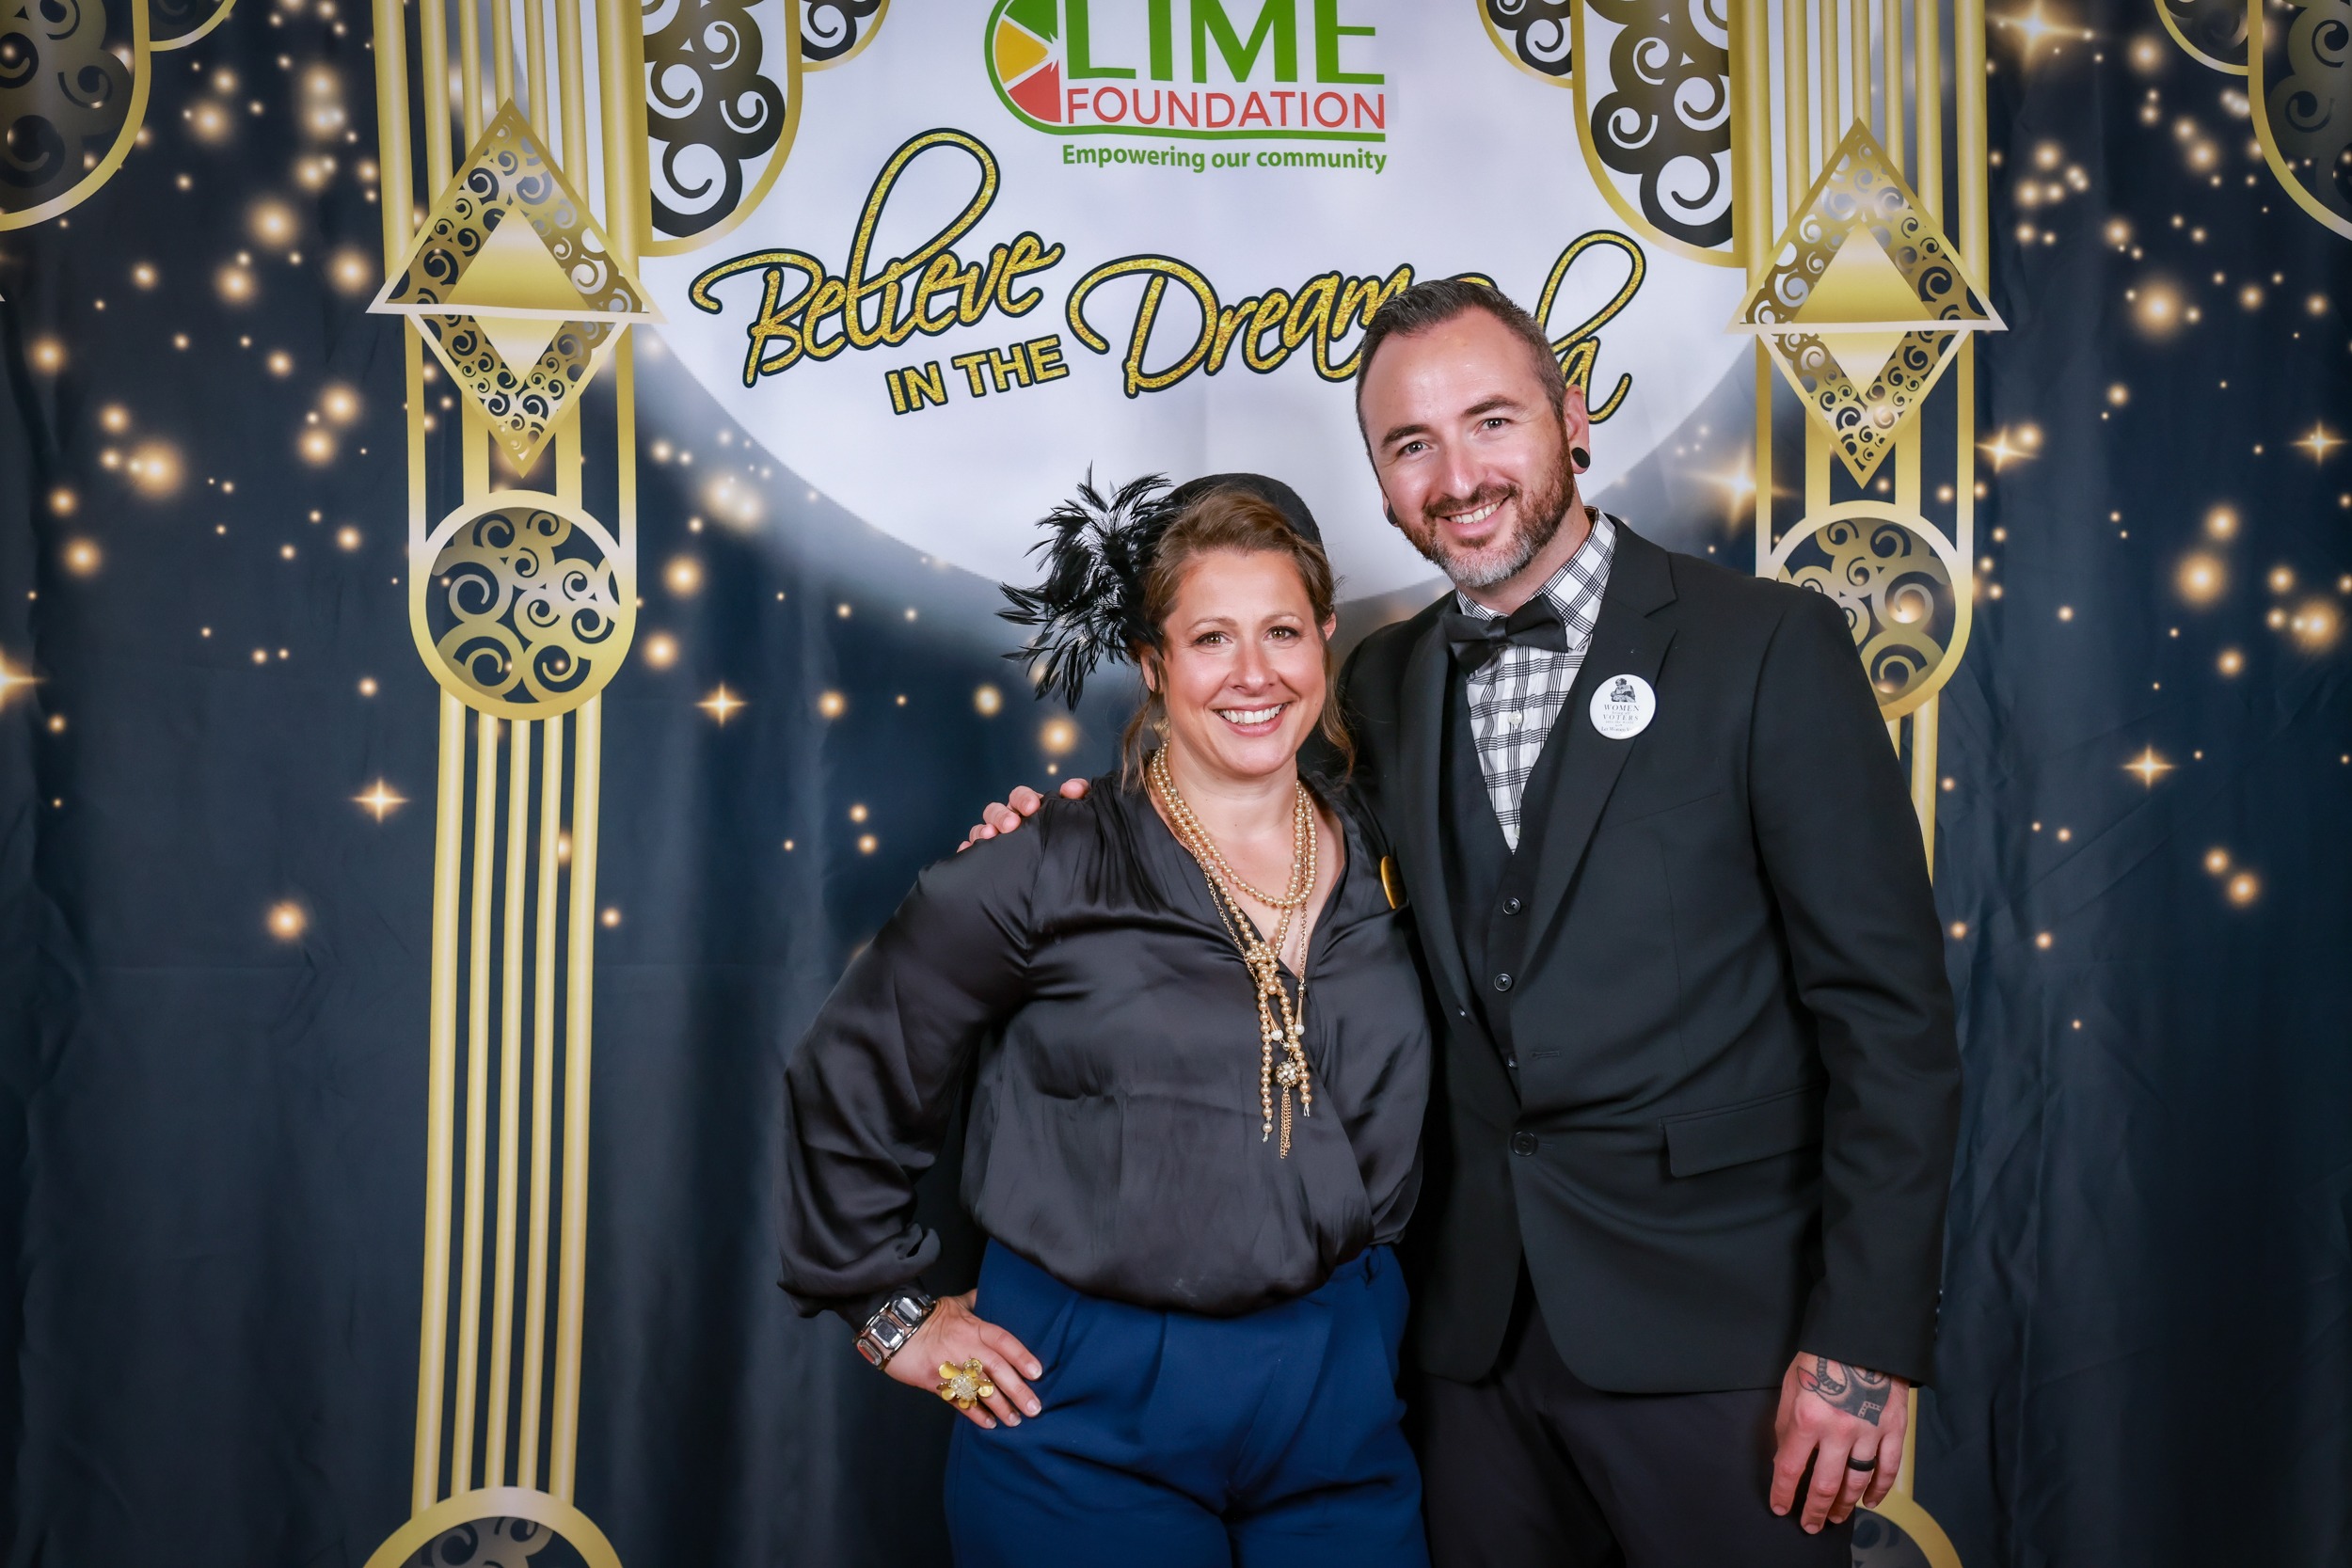 A man and woman posing for a photo in front of a backdrop at a Sonoma County Non-Profit Organization event hosted by The LIME Foundation of Santa Rosa.